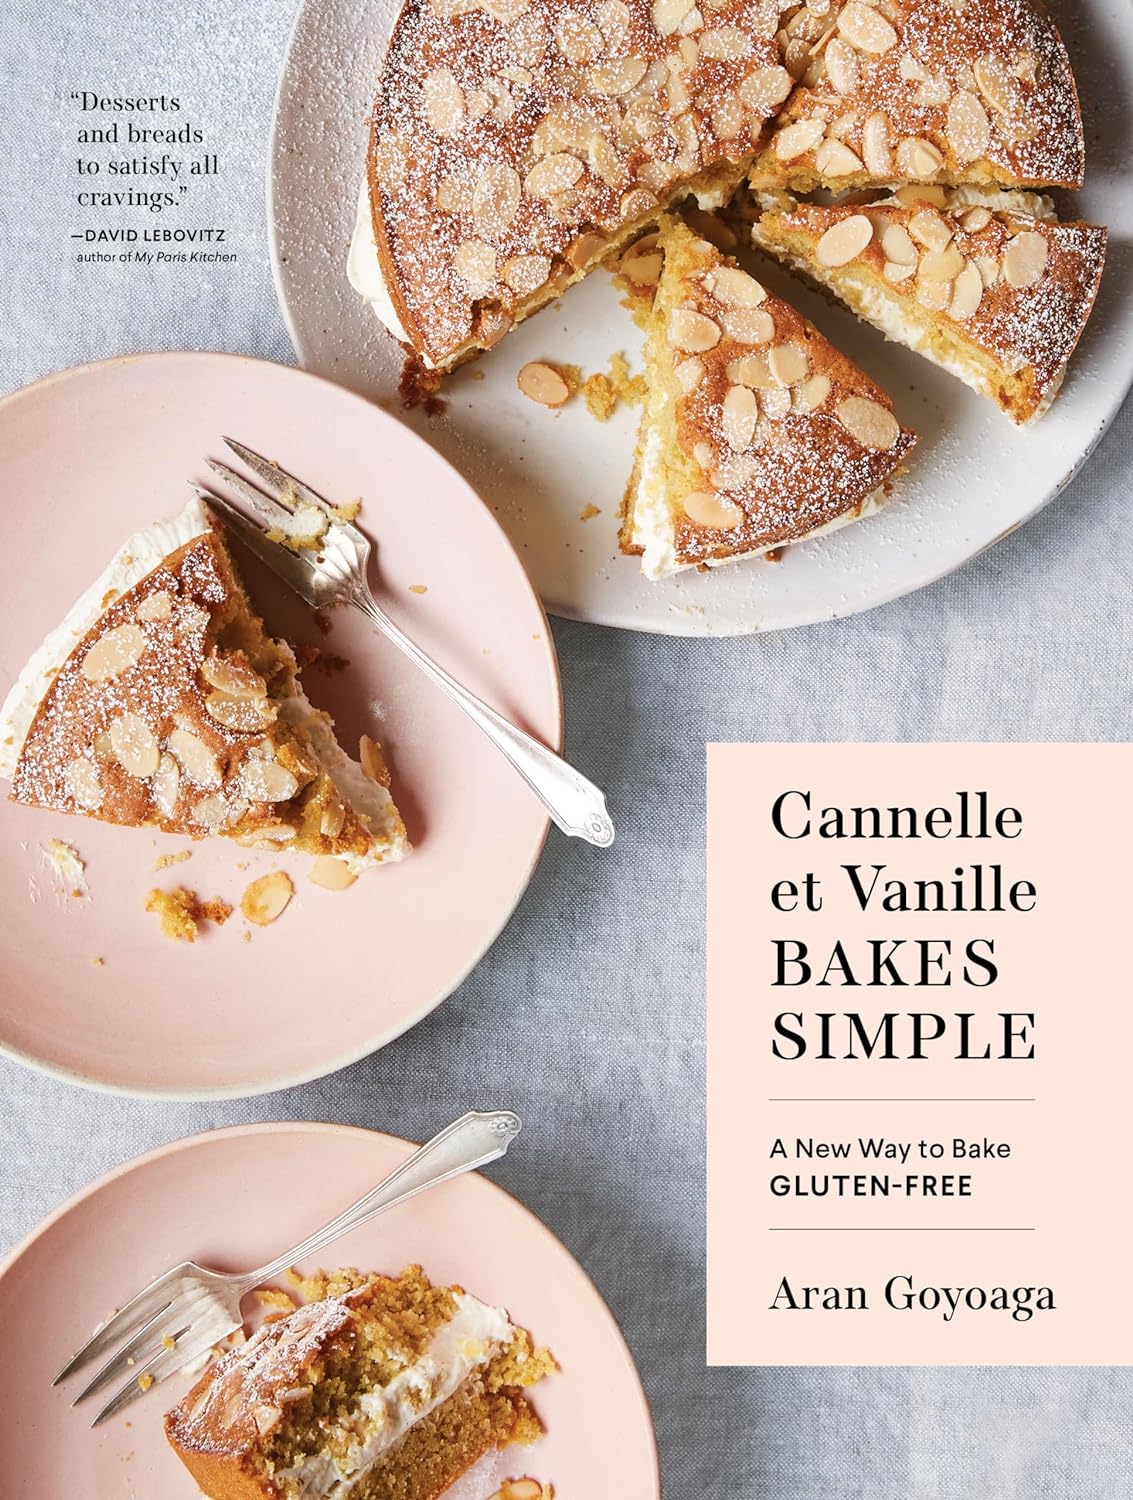 Front cover of "Cannelle et Vanille Bakes Simple". Pictured is a display of a gluten free cake recipe from inside. Gluten free baking. Gluten free lifestyle. International baking. 